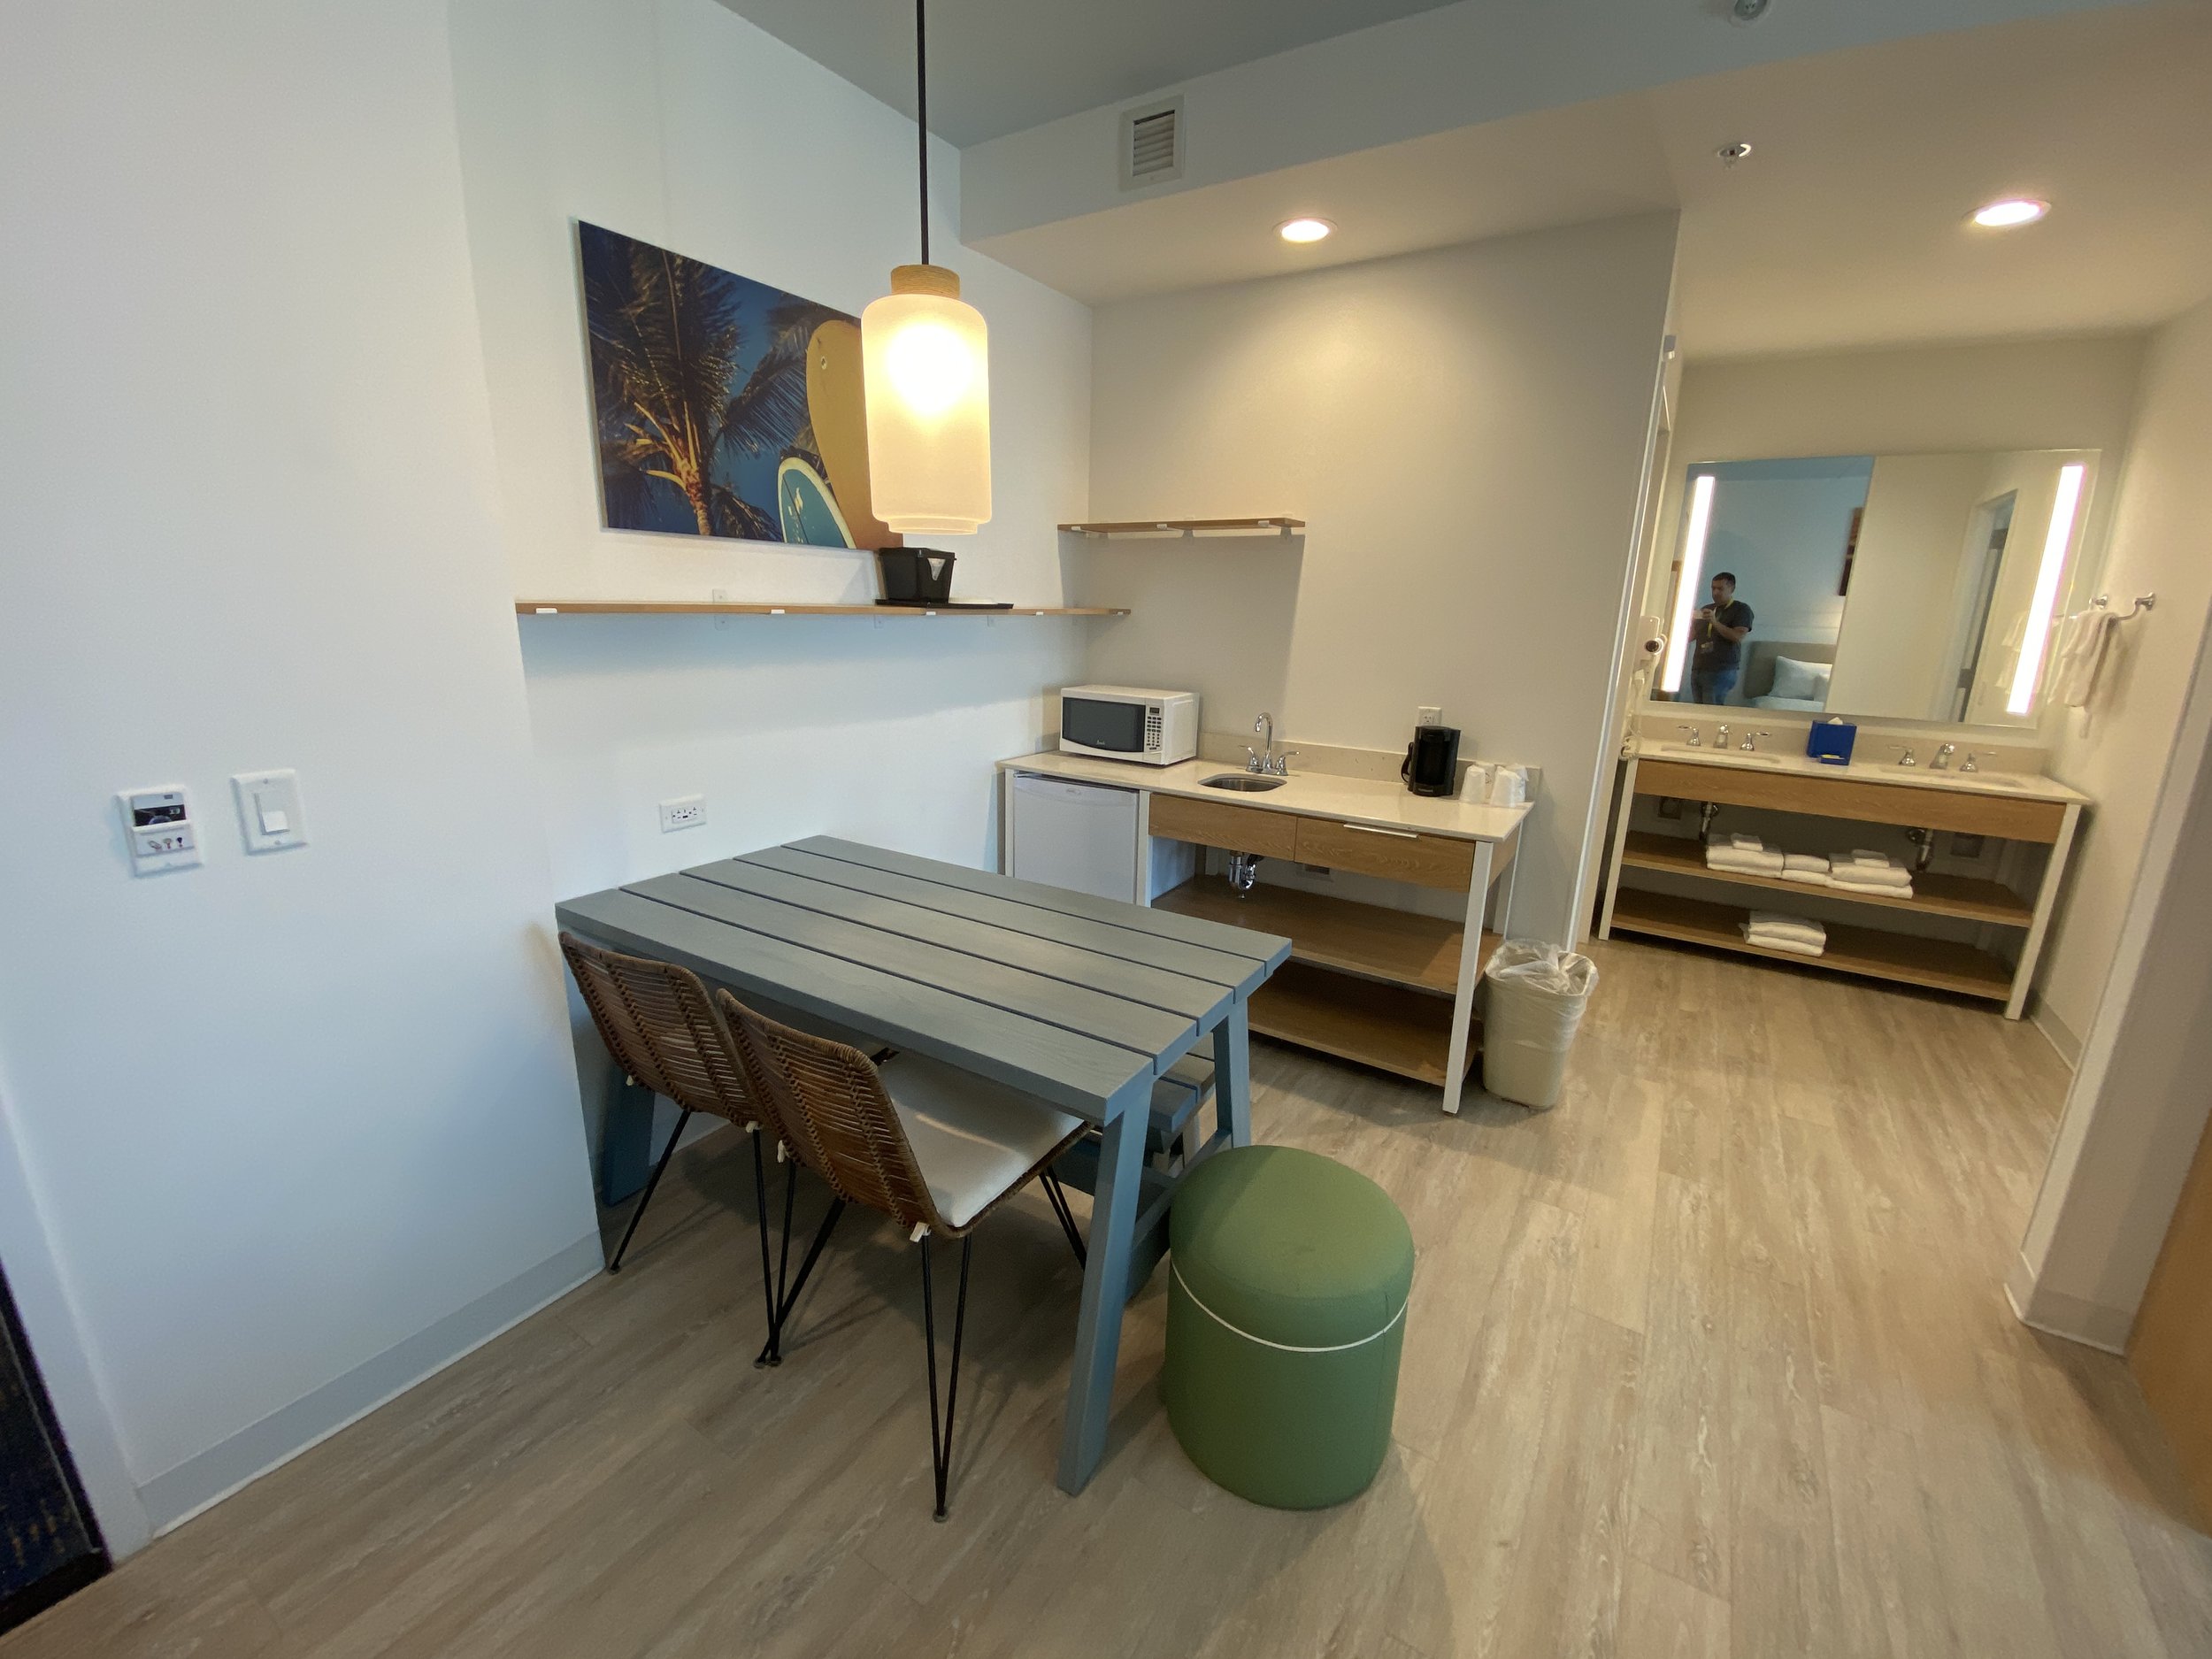  There is also a kitchenette area, a picnic table for meals and gathering, and a bathroom with separate bath and vanity areas so multiple people can get ready at once. 